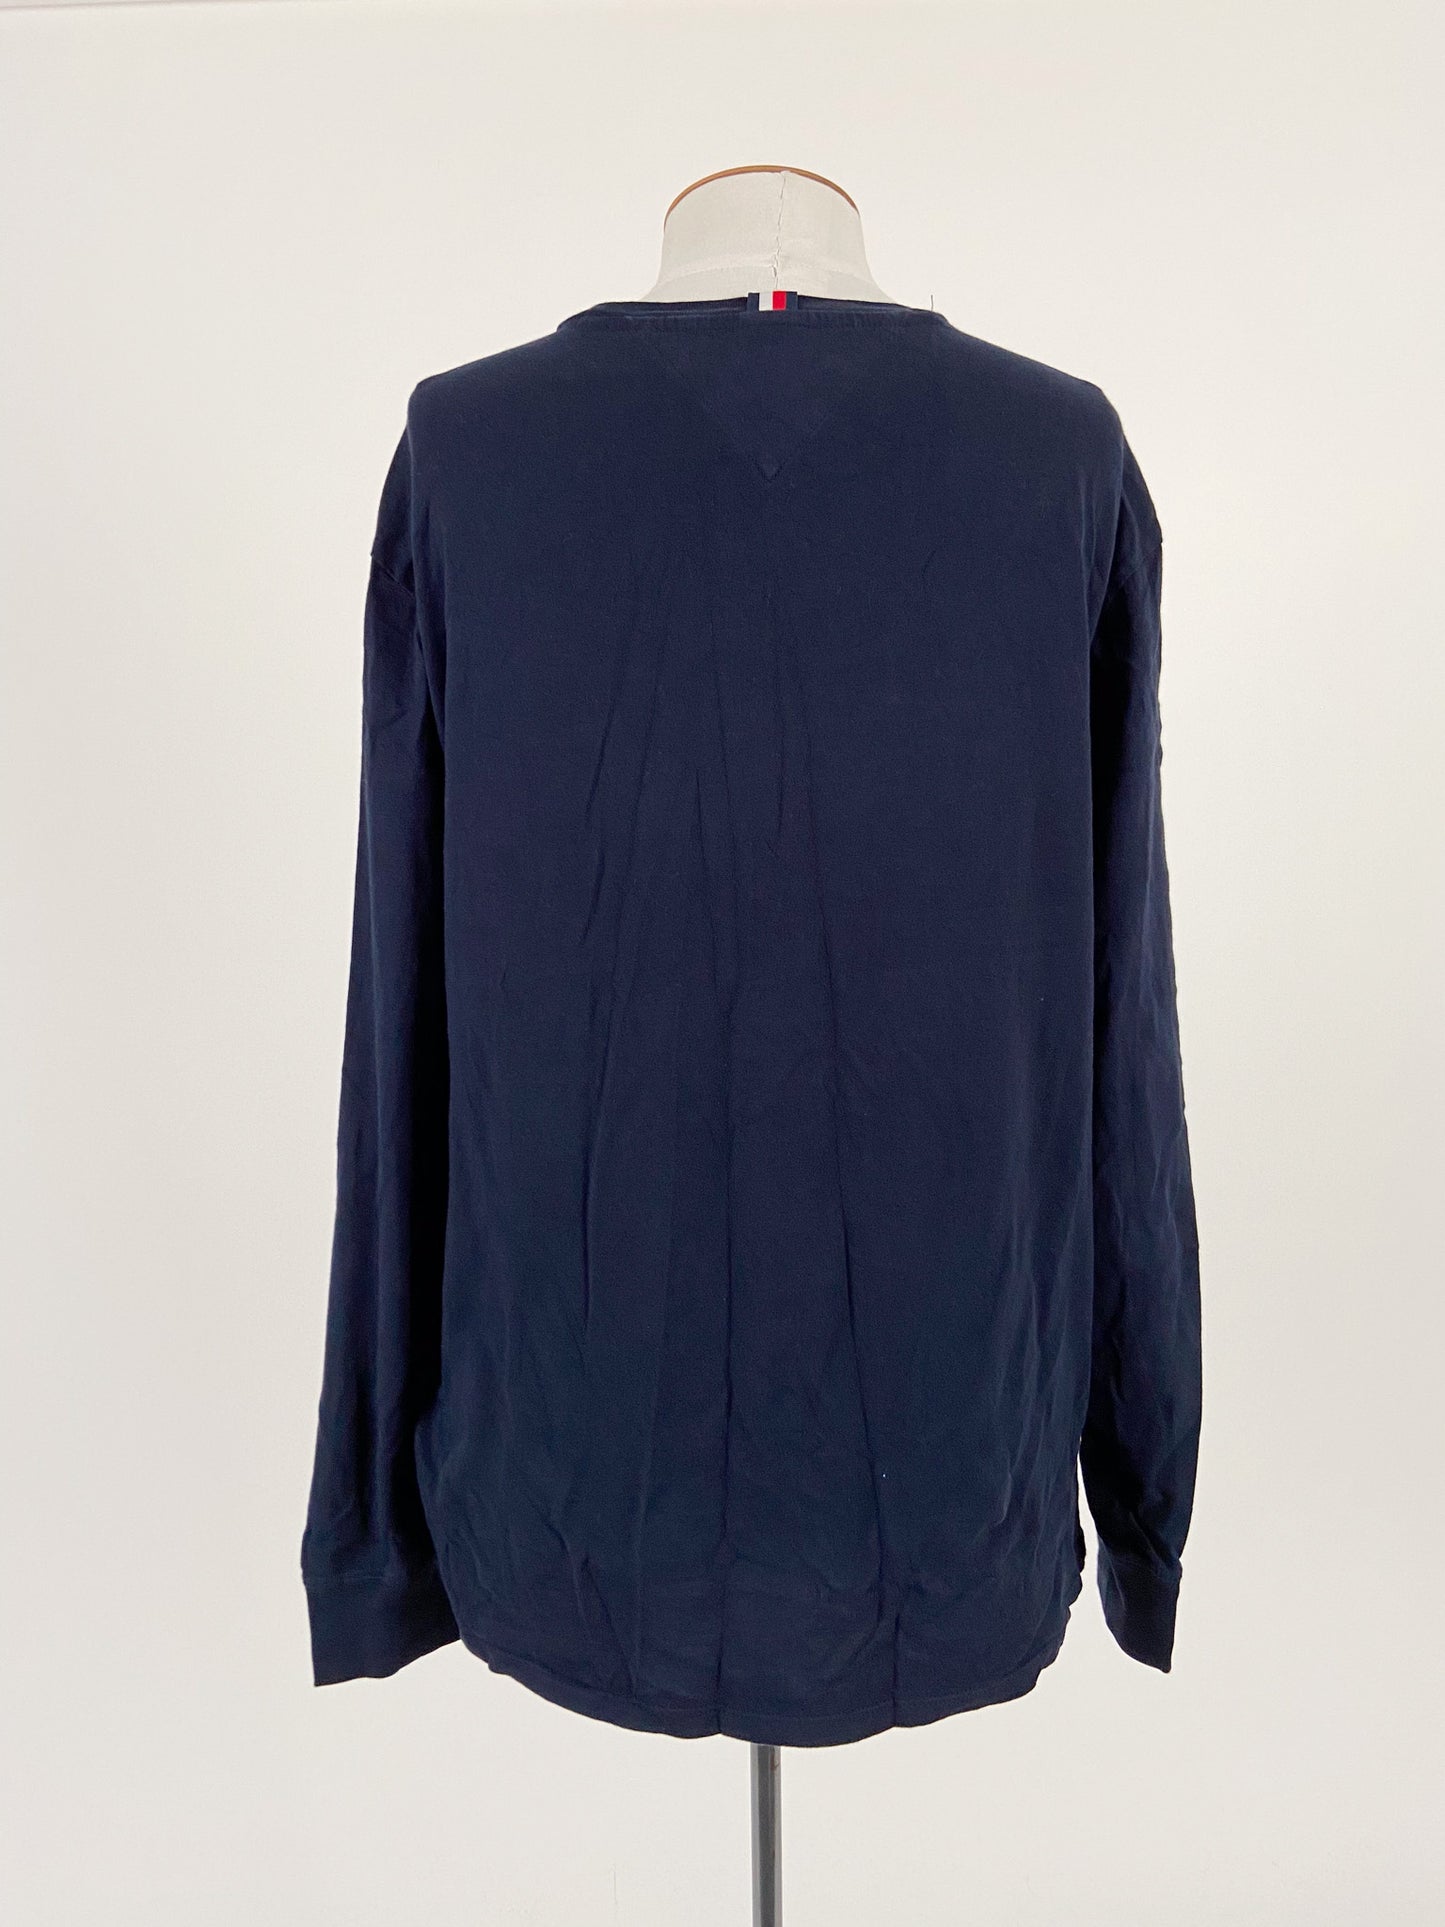 Tommy Hilfiger | Navy Casual Top | Size L